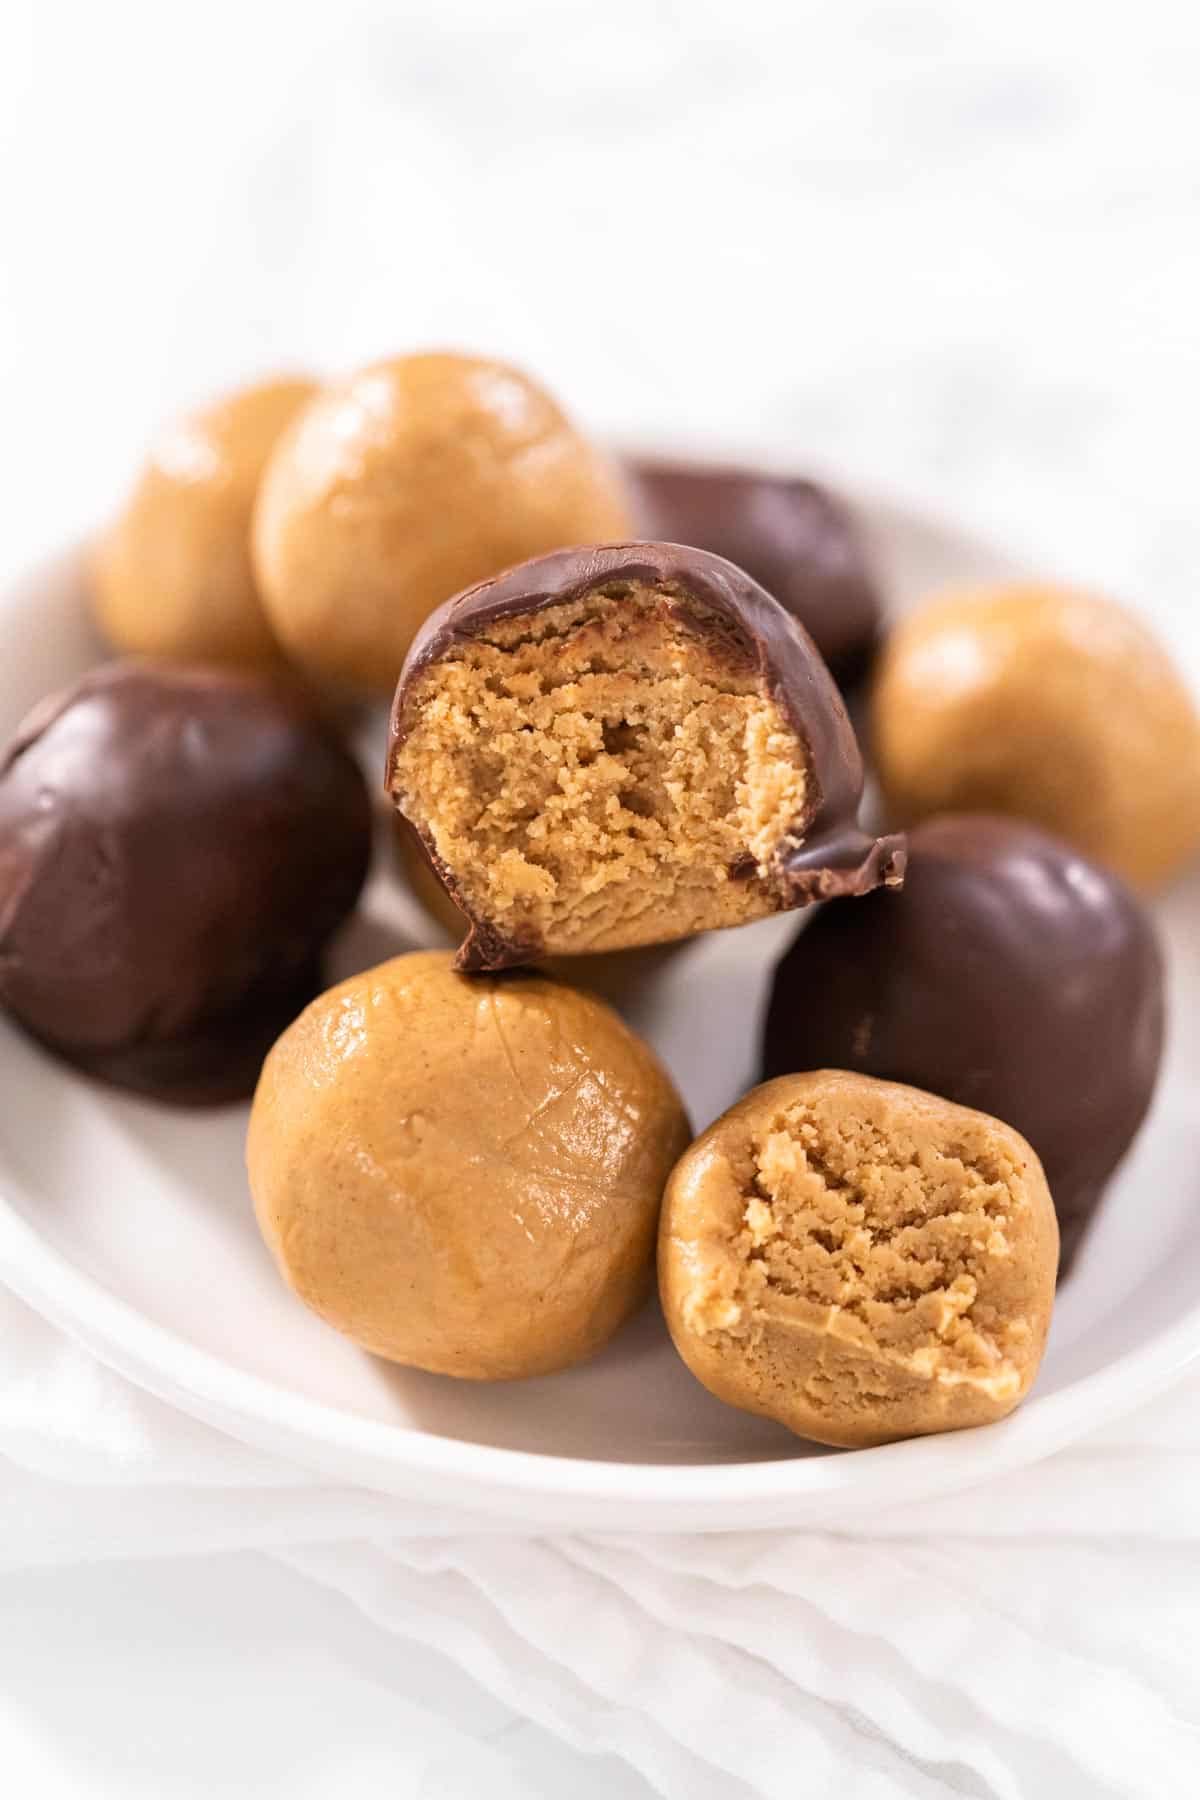 A mixture of peanut butter balls, some covered in chocolate.